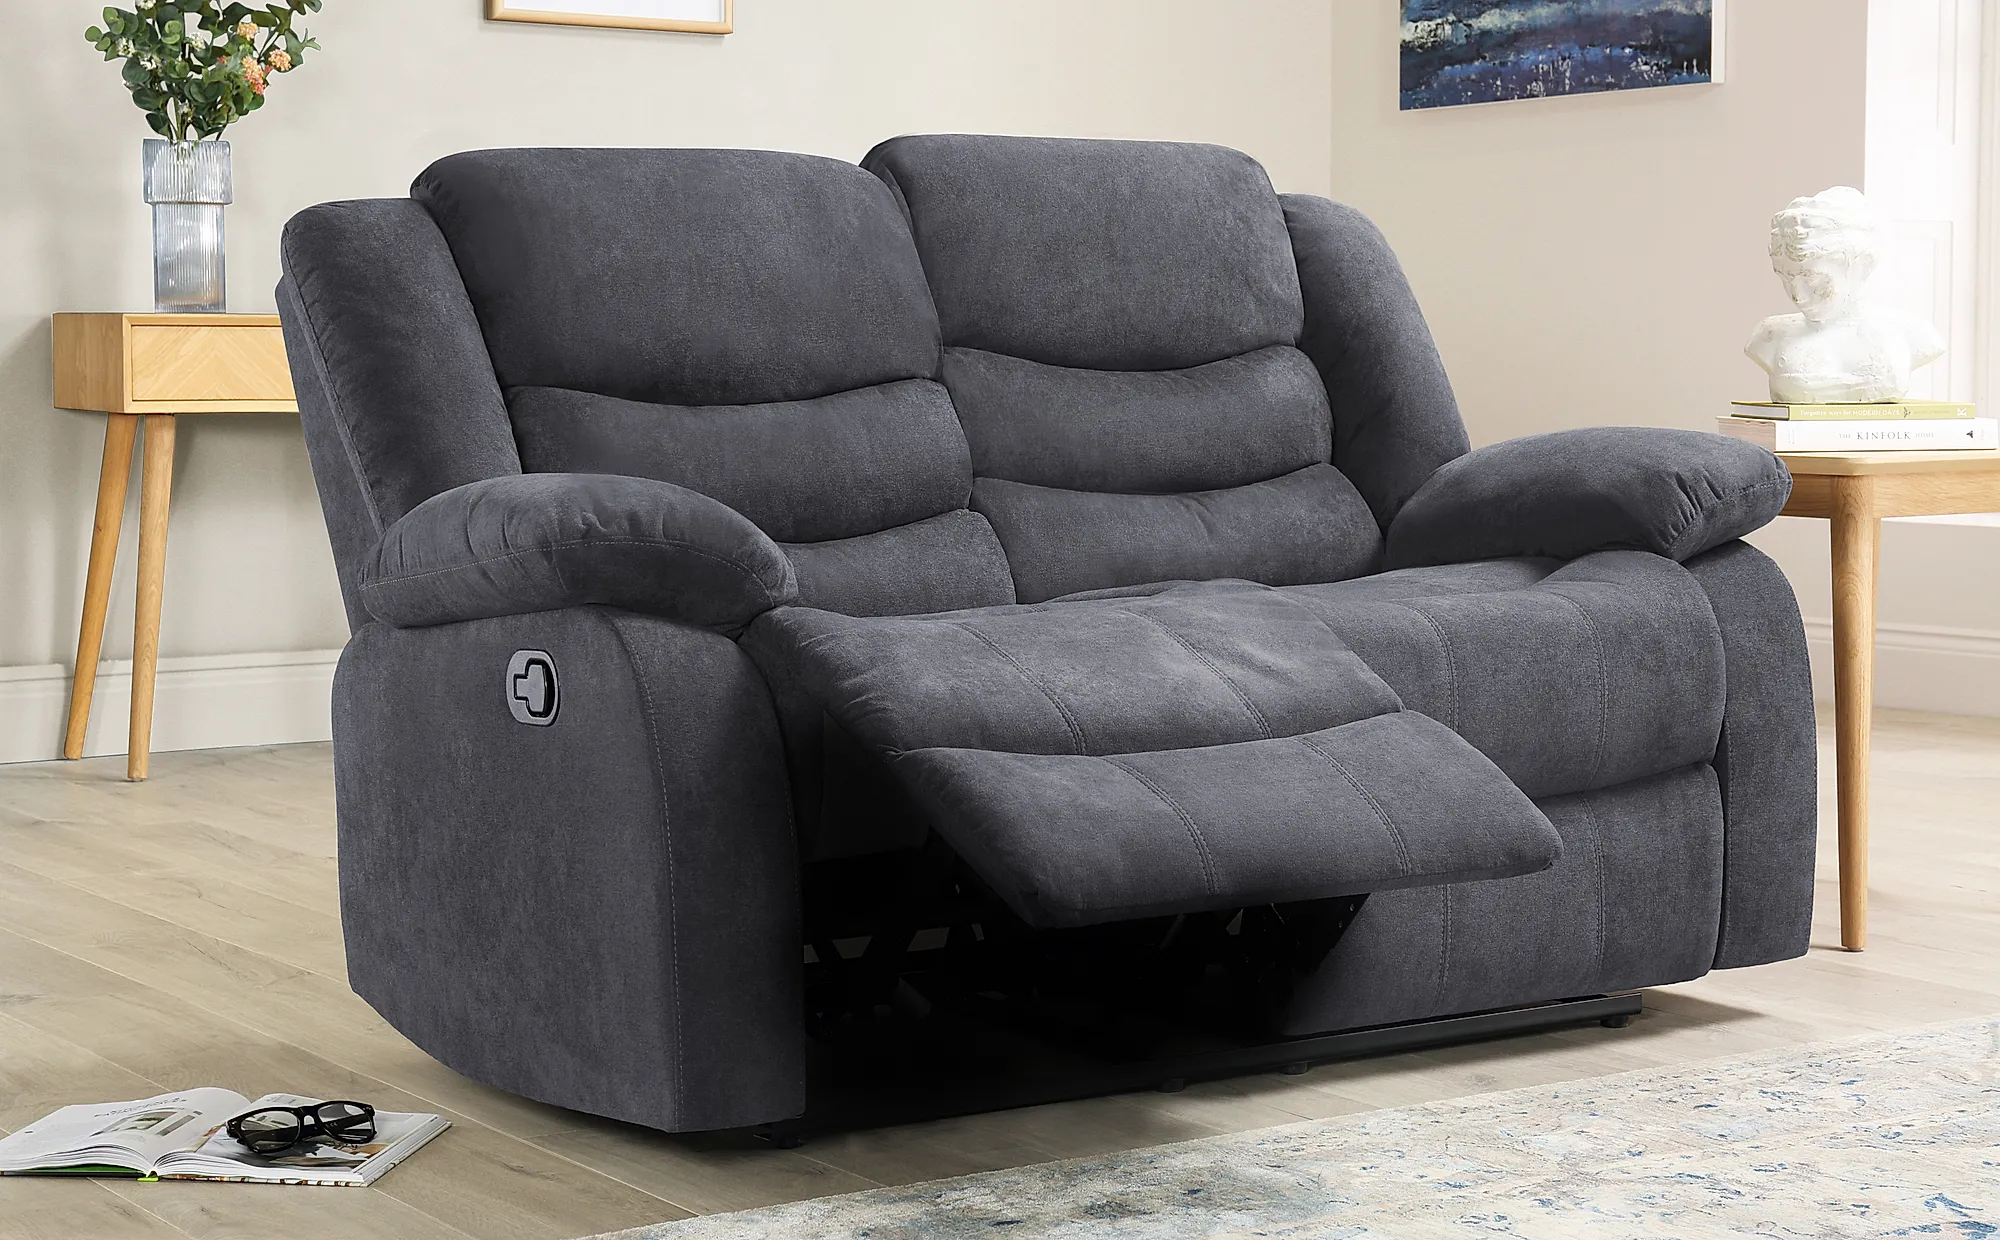 SILVER GREY Luxury Soft Fabric Material Reclining 2 Seater Sofa 2 Armchairs Recliner Sofa Suite SUFFOLK 2+1+1 